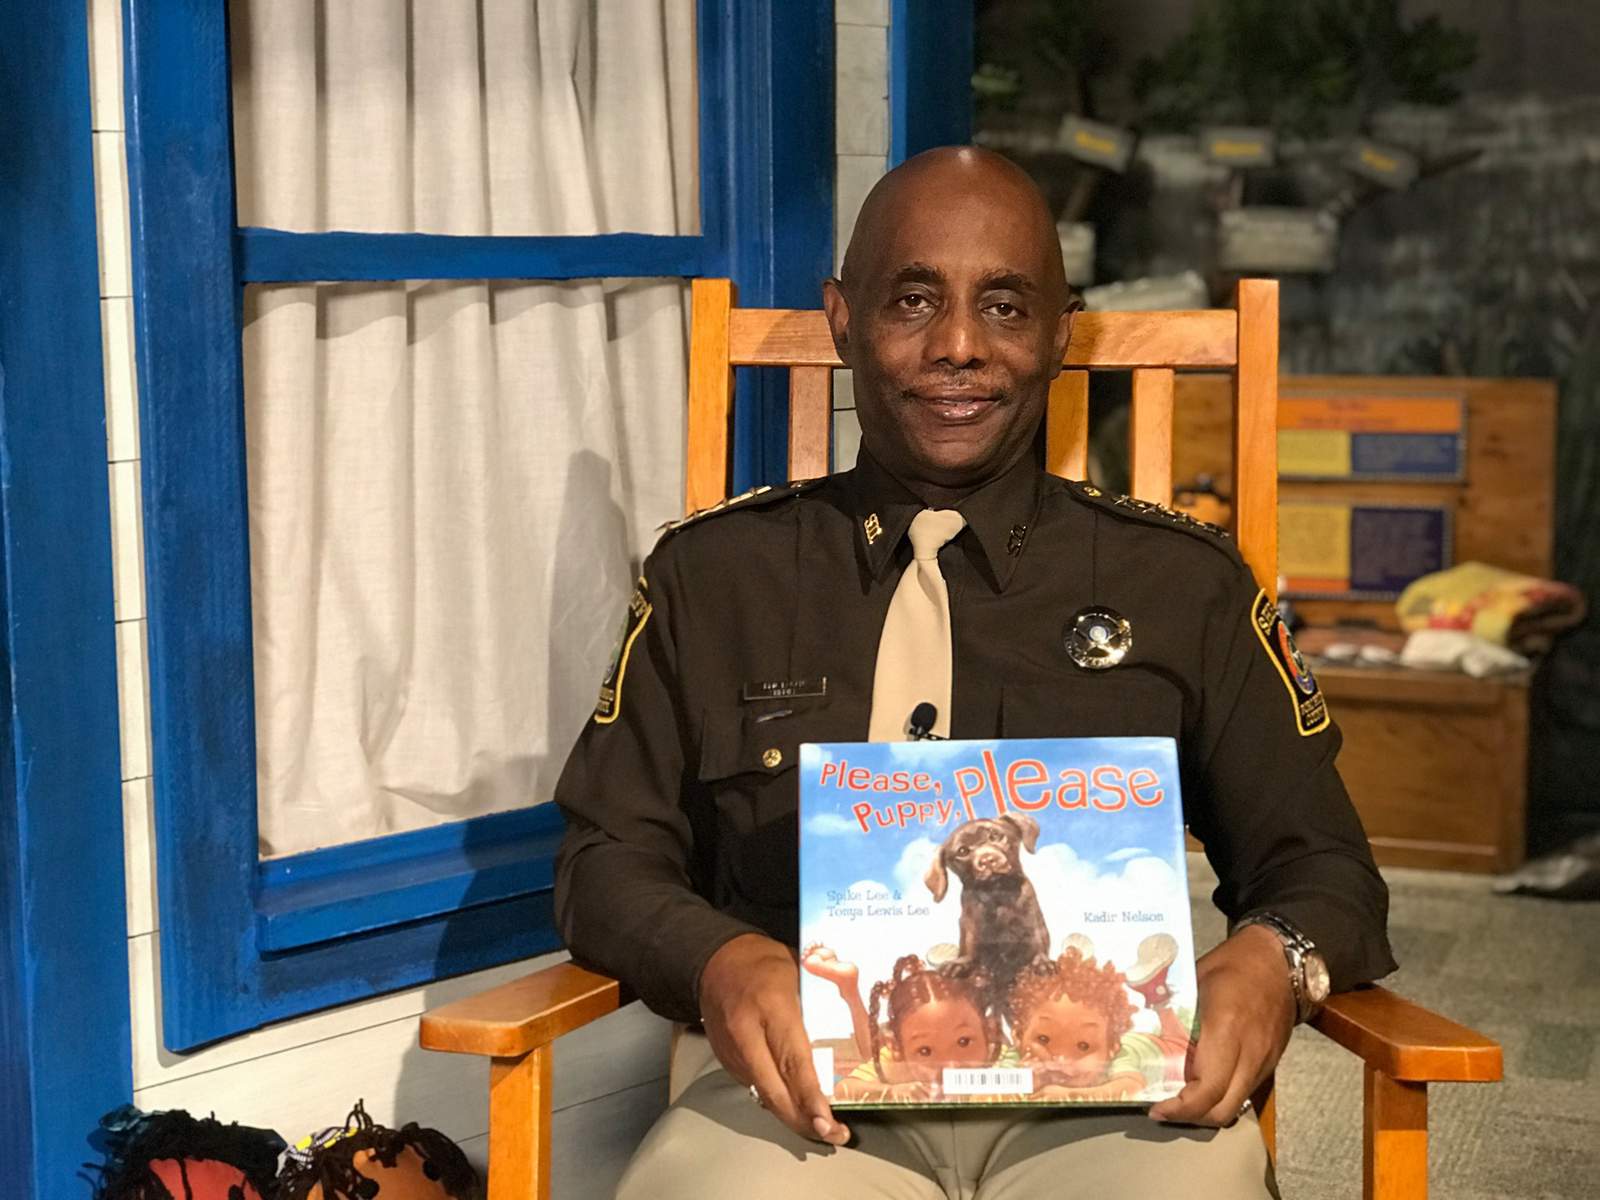 Community leaders help inspire children during Black History Month through virtual story times